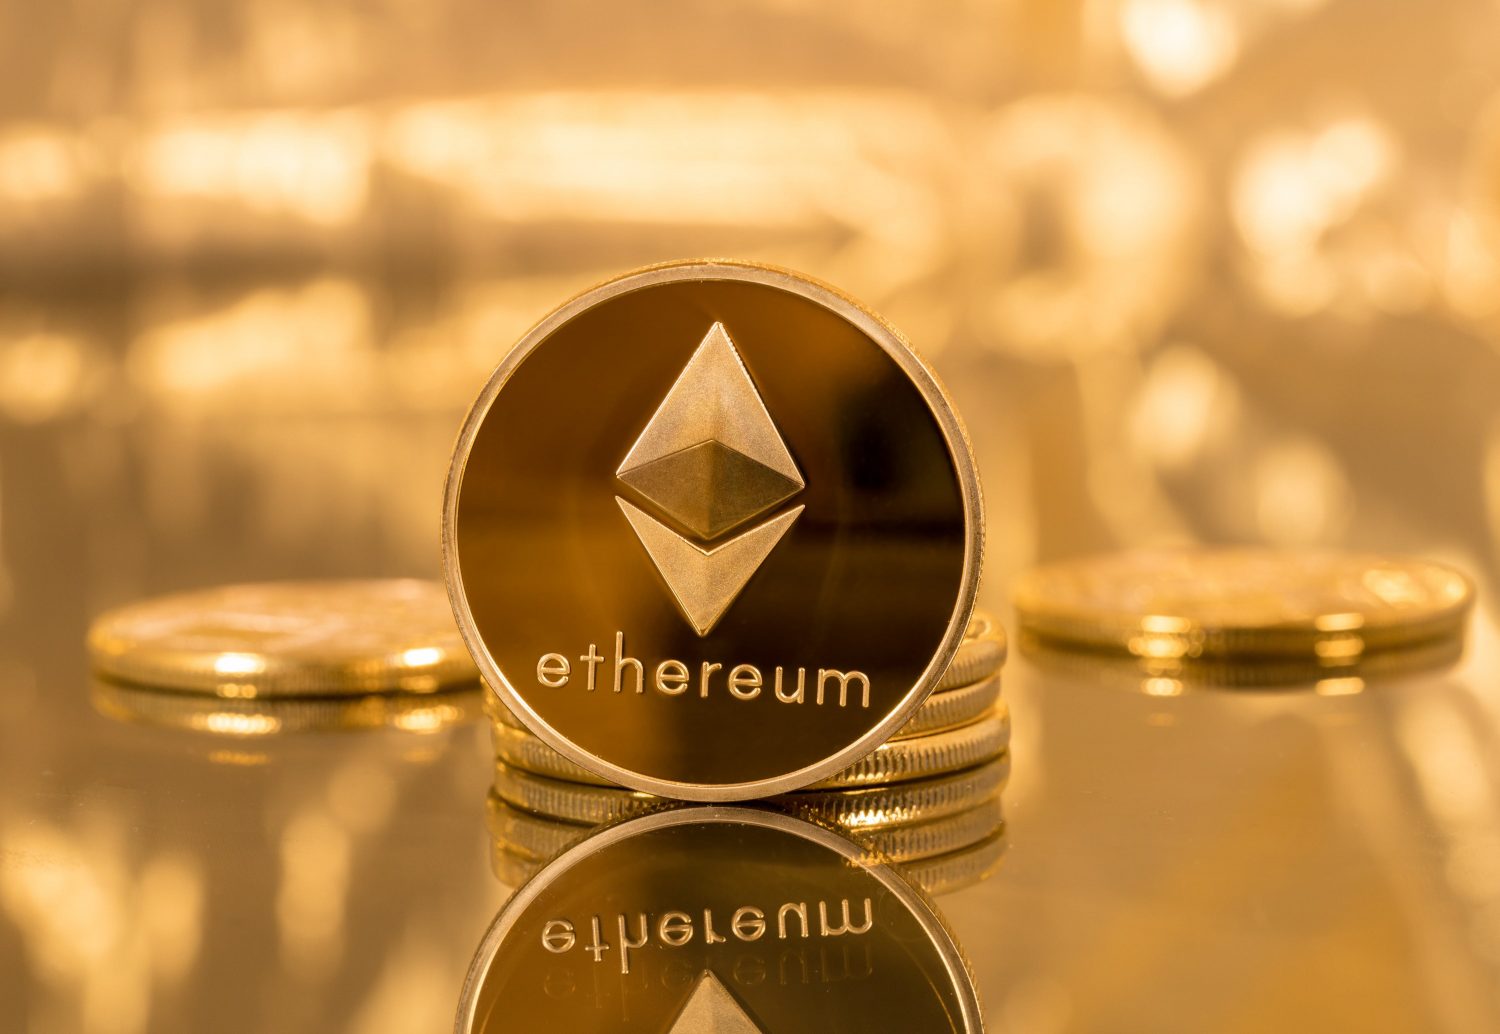 A Surge in the Crypto Market has Pushed the Price of Ethereum to an All-Time High